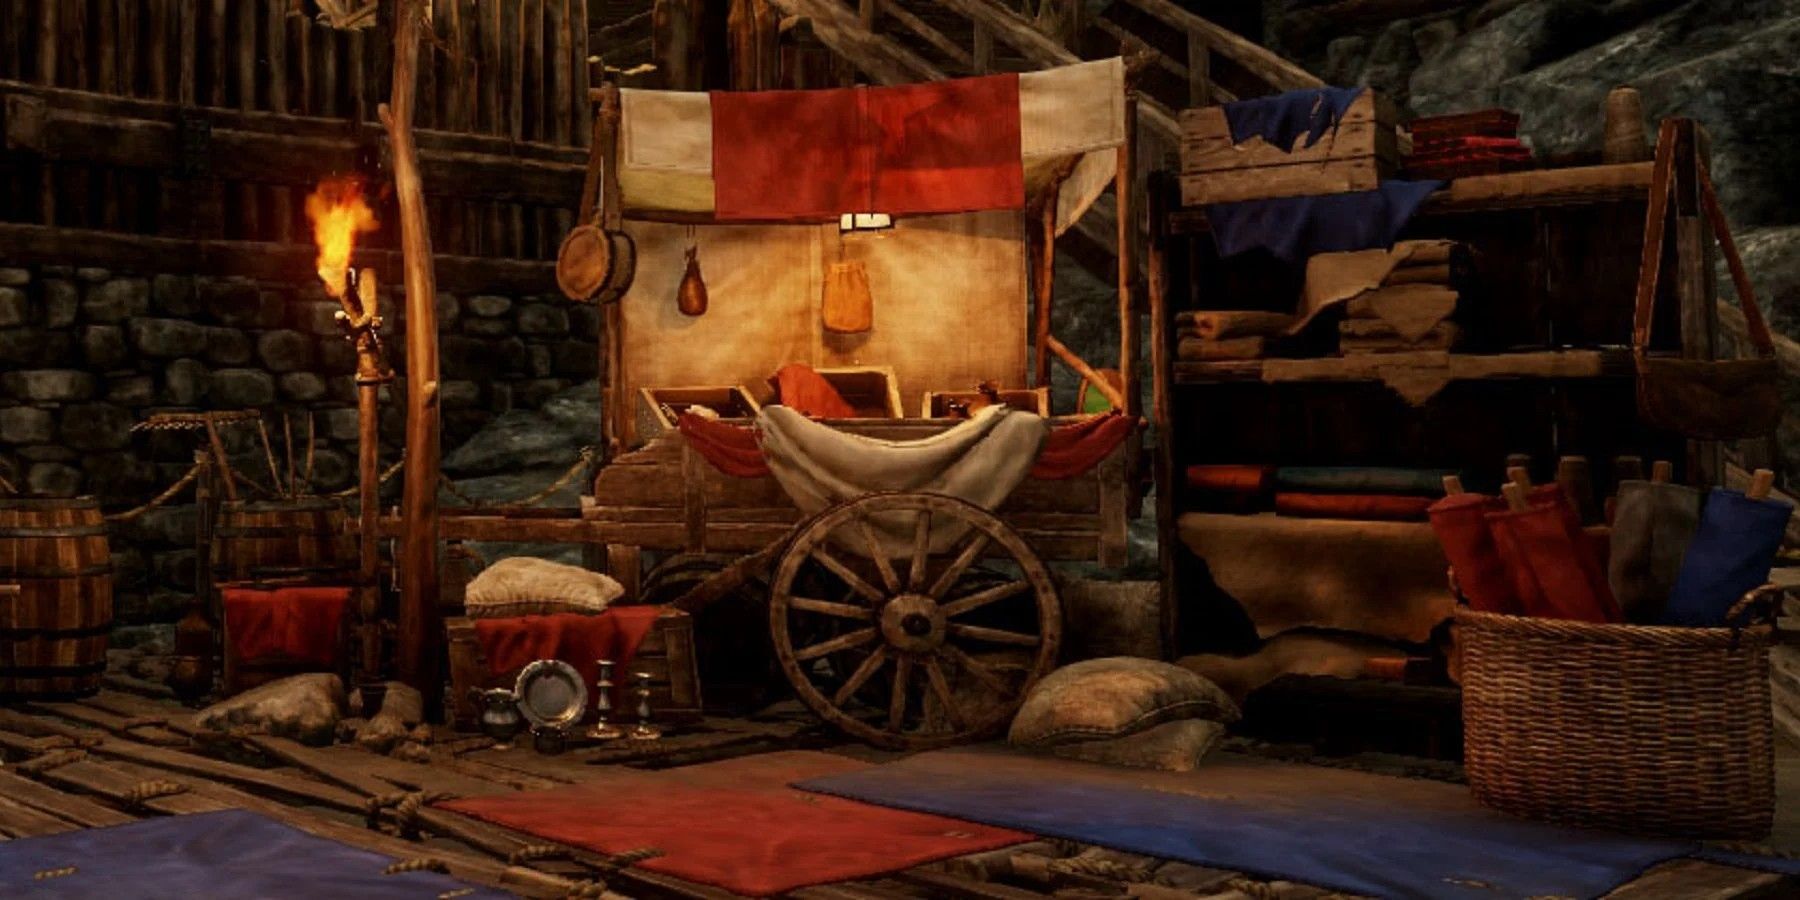 One of the trading posts in New World's settlements